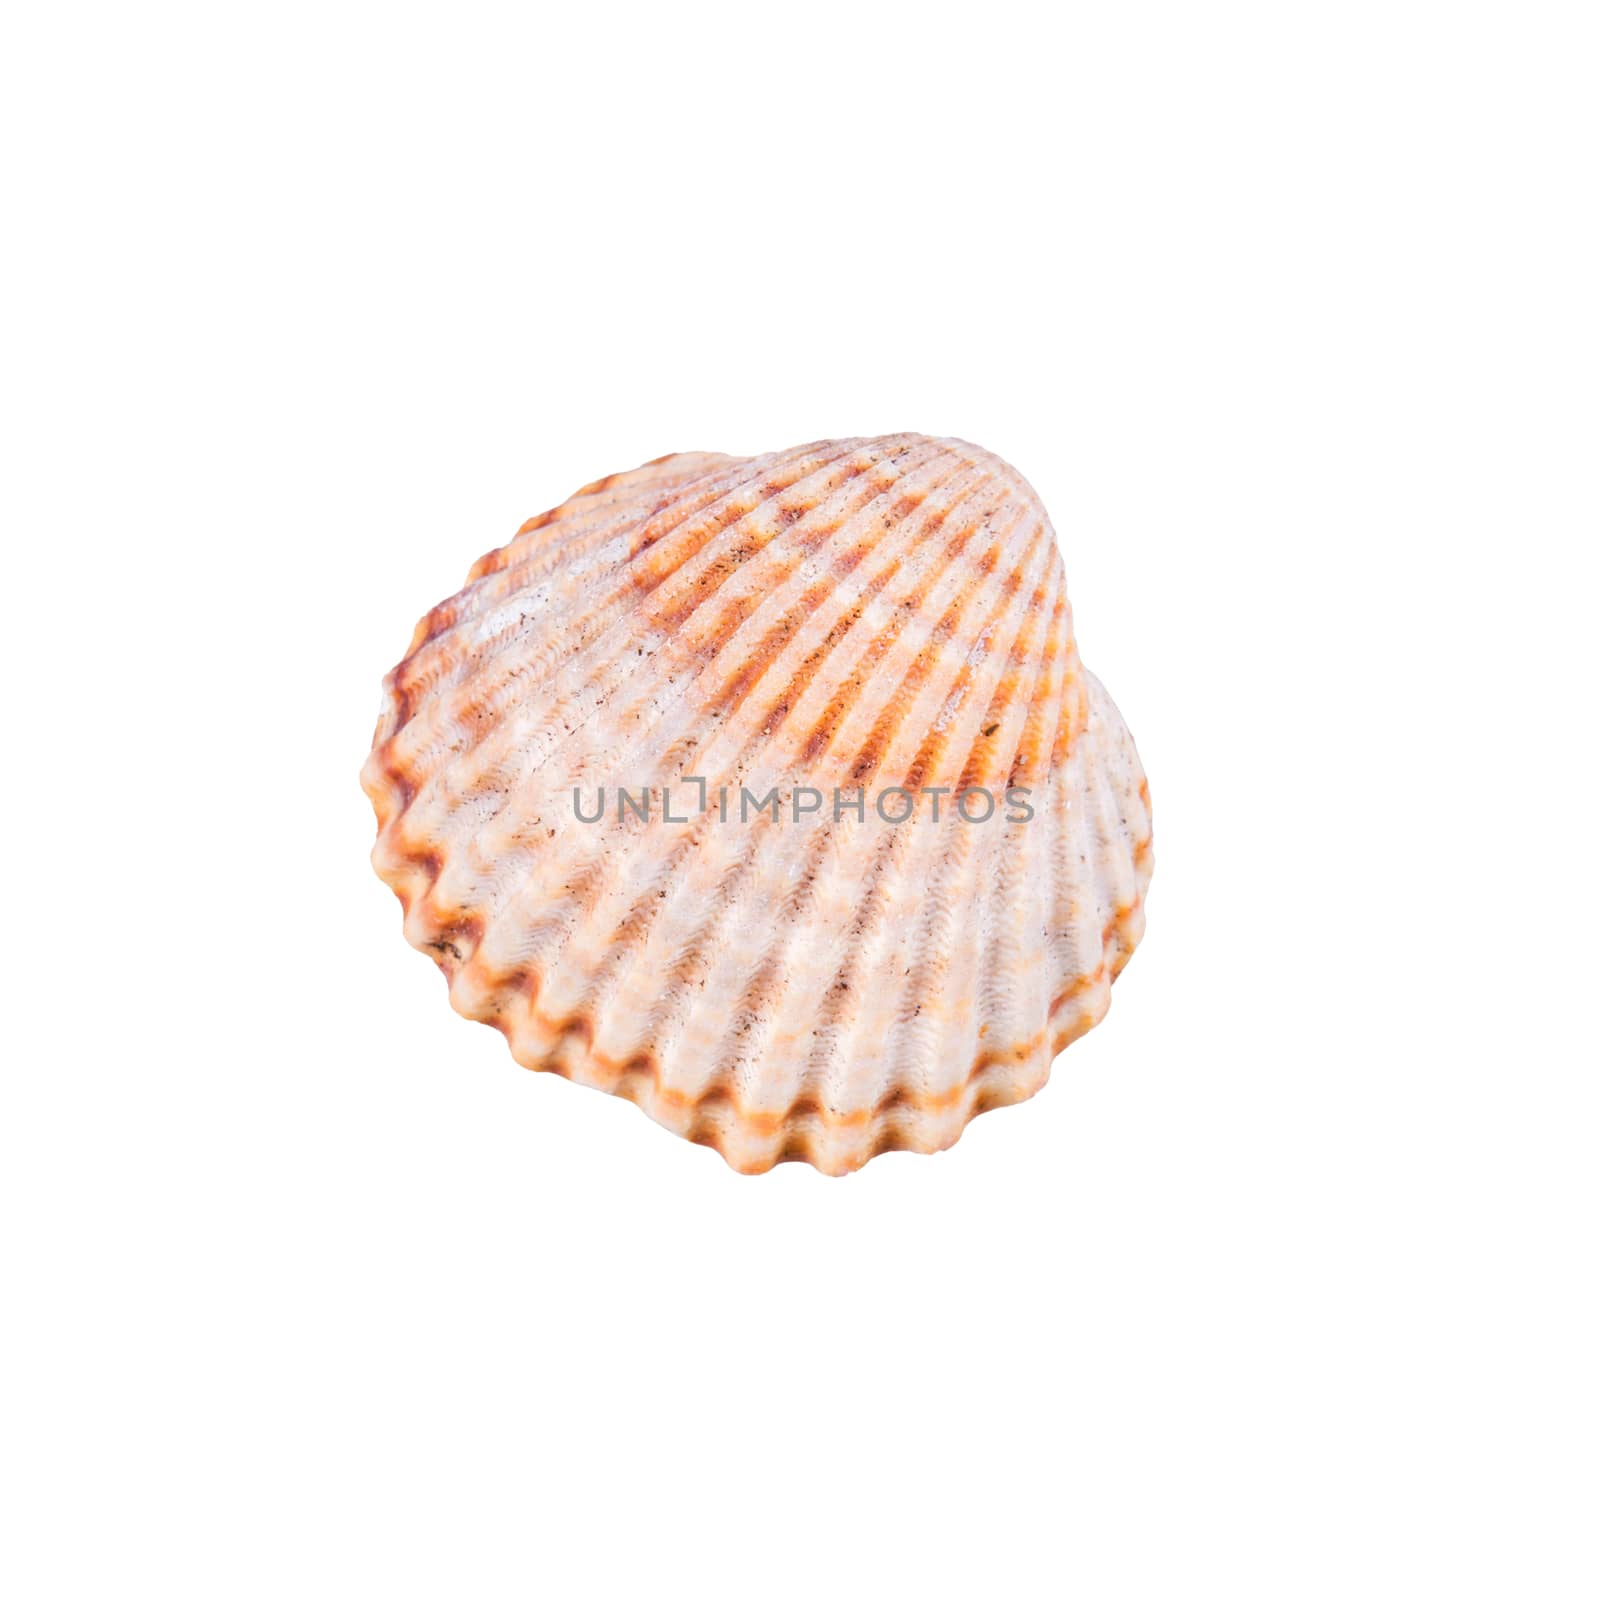 Sea shell on a white background by neryx